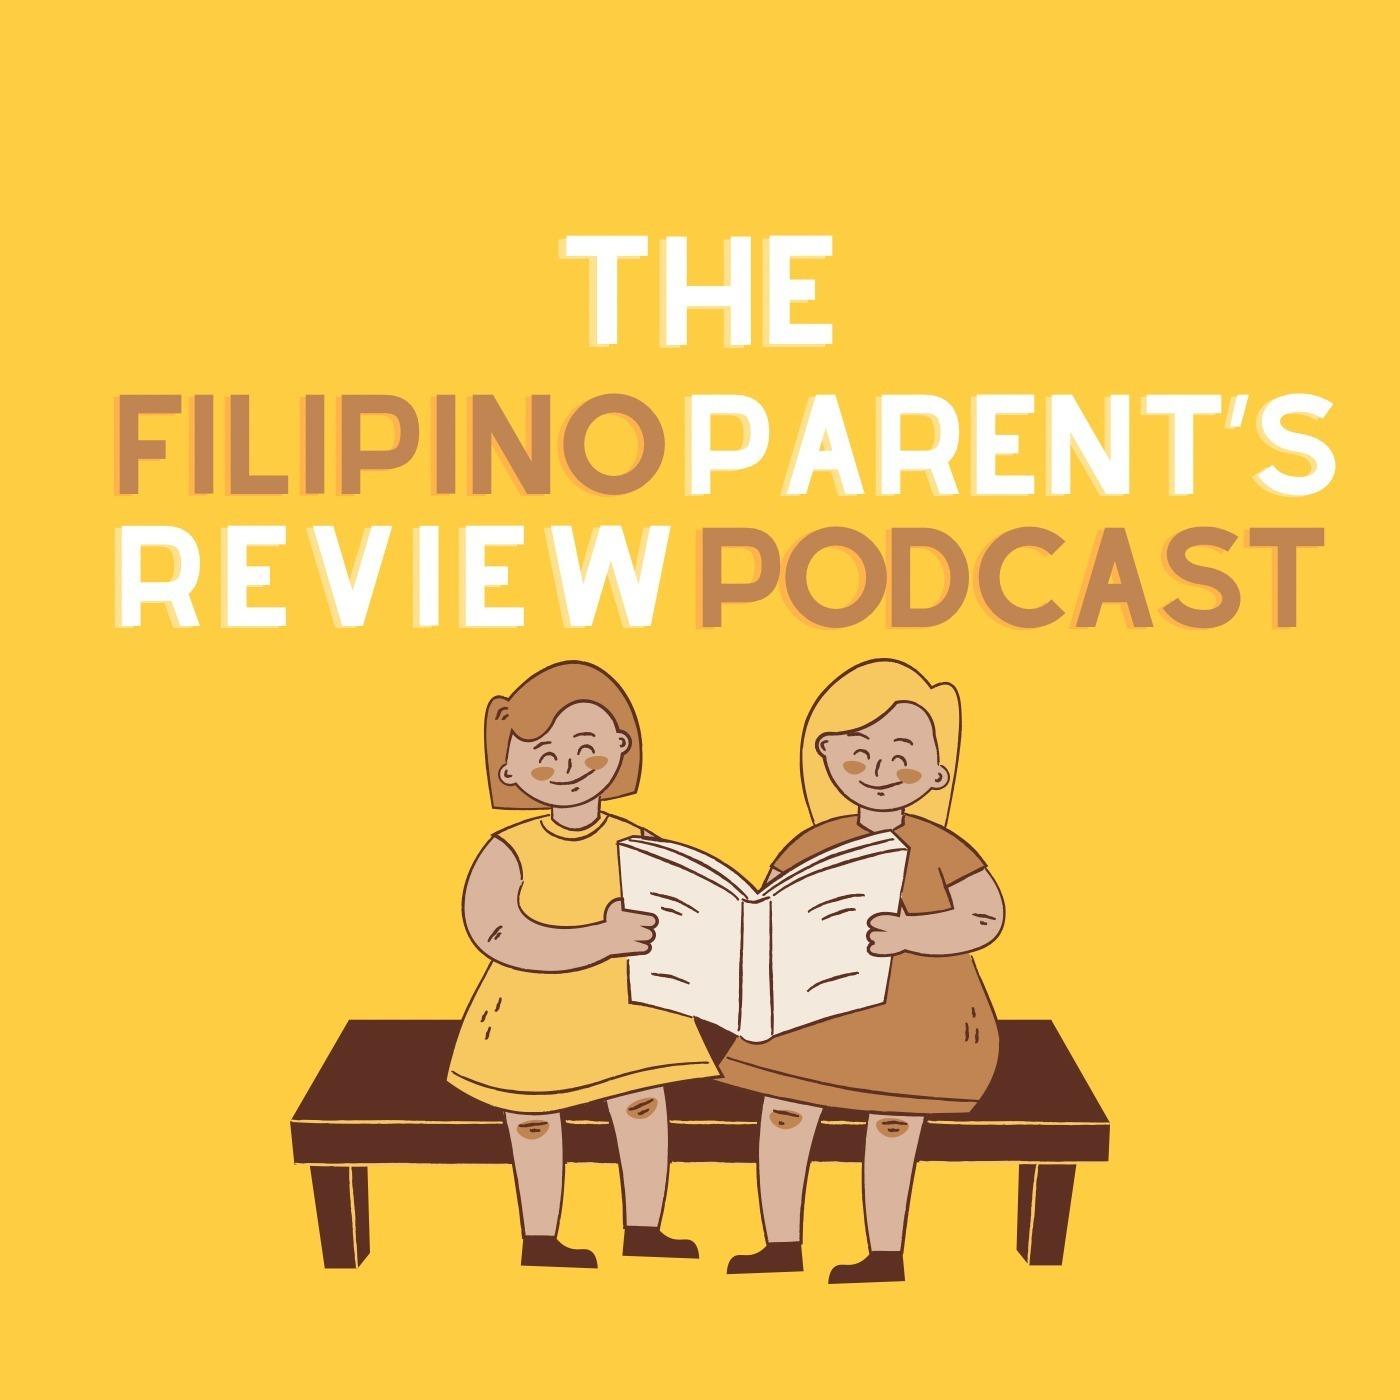 The Filipino Parent's Review